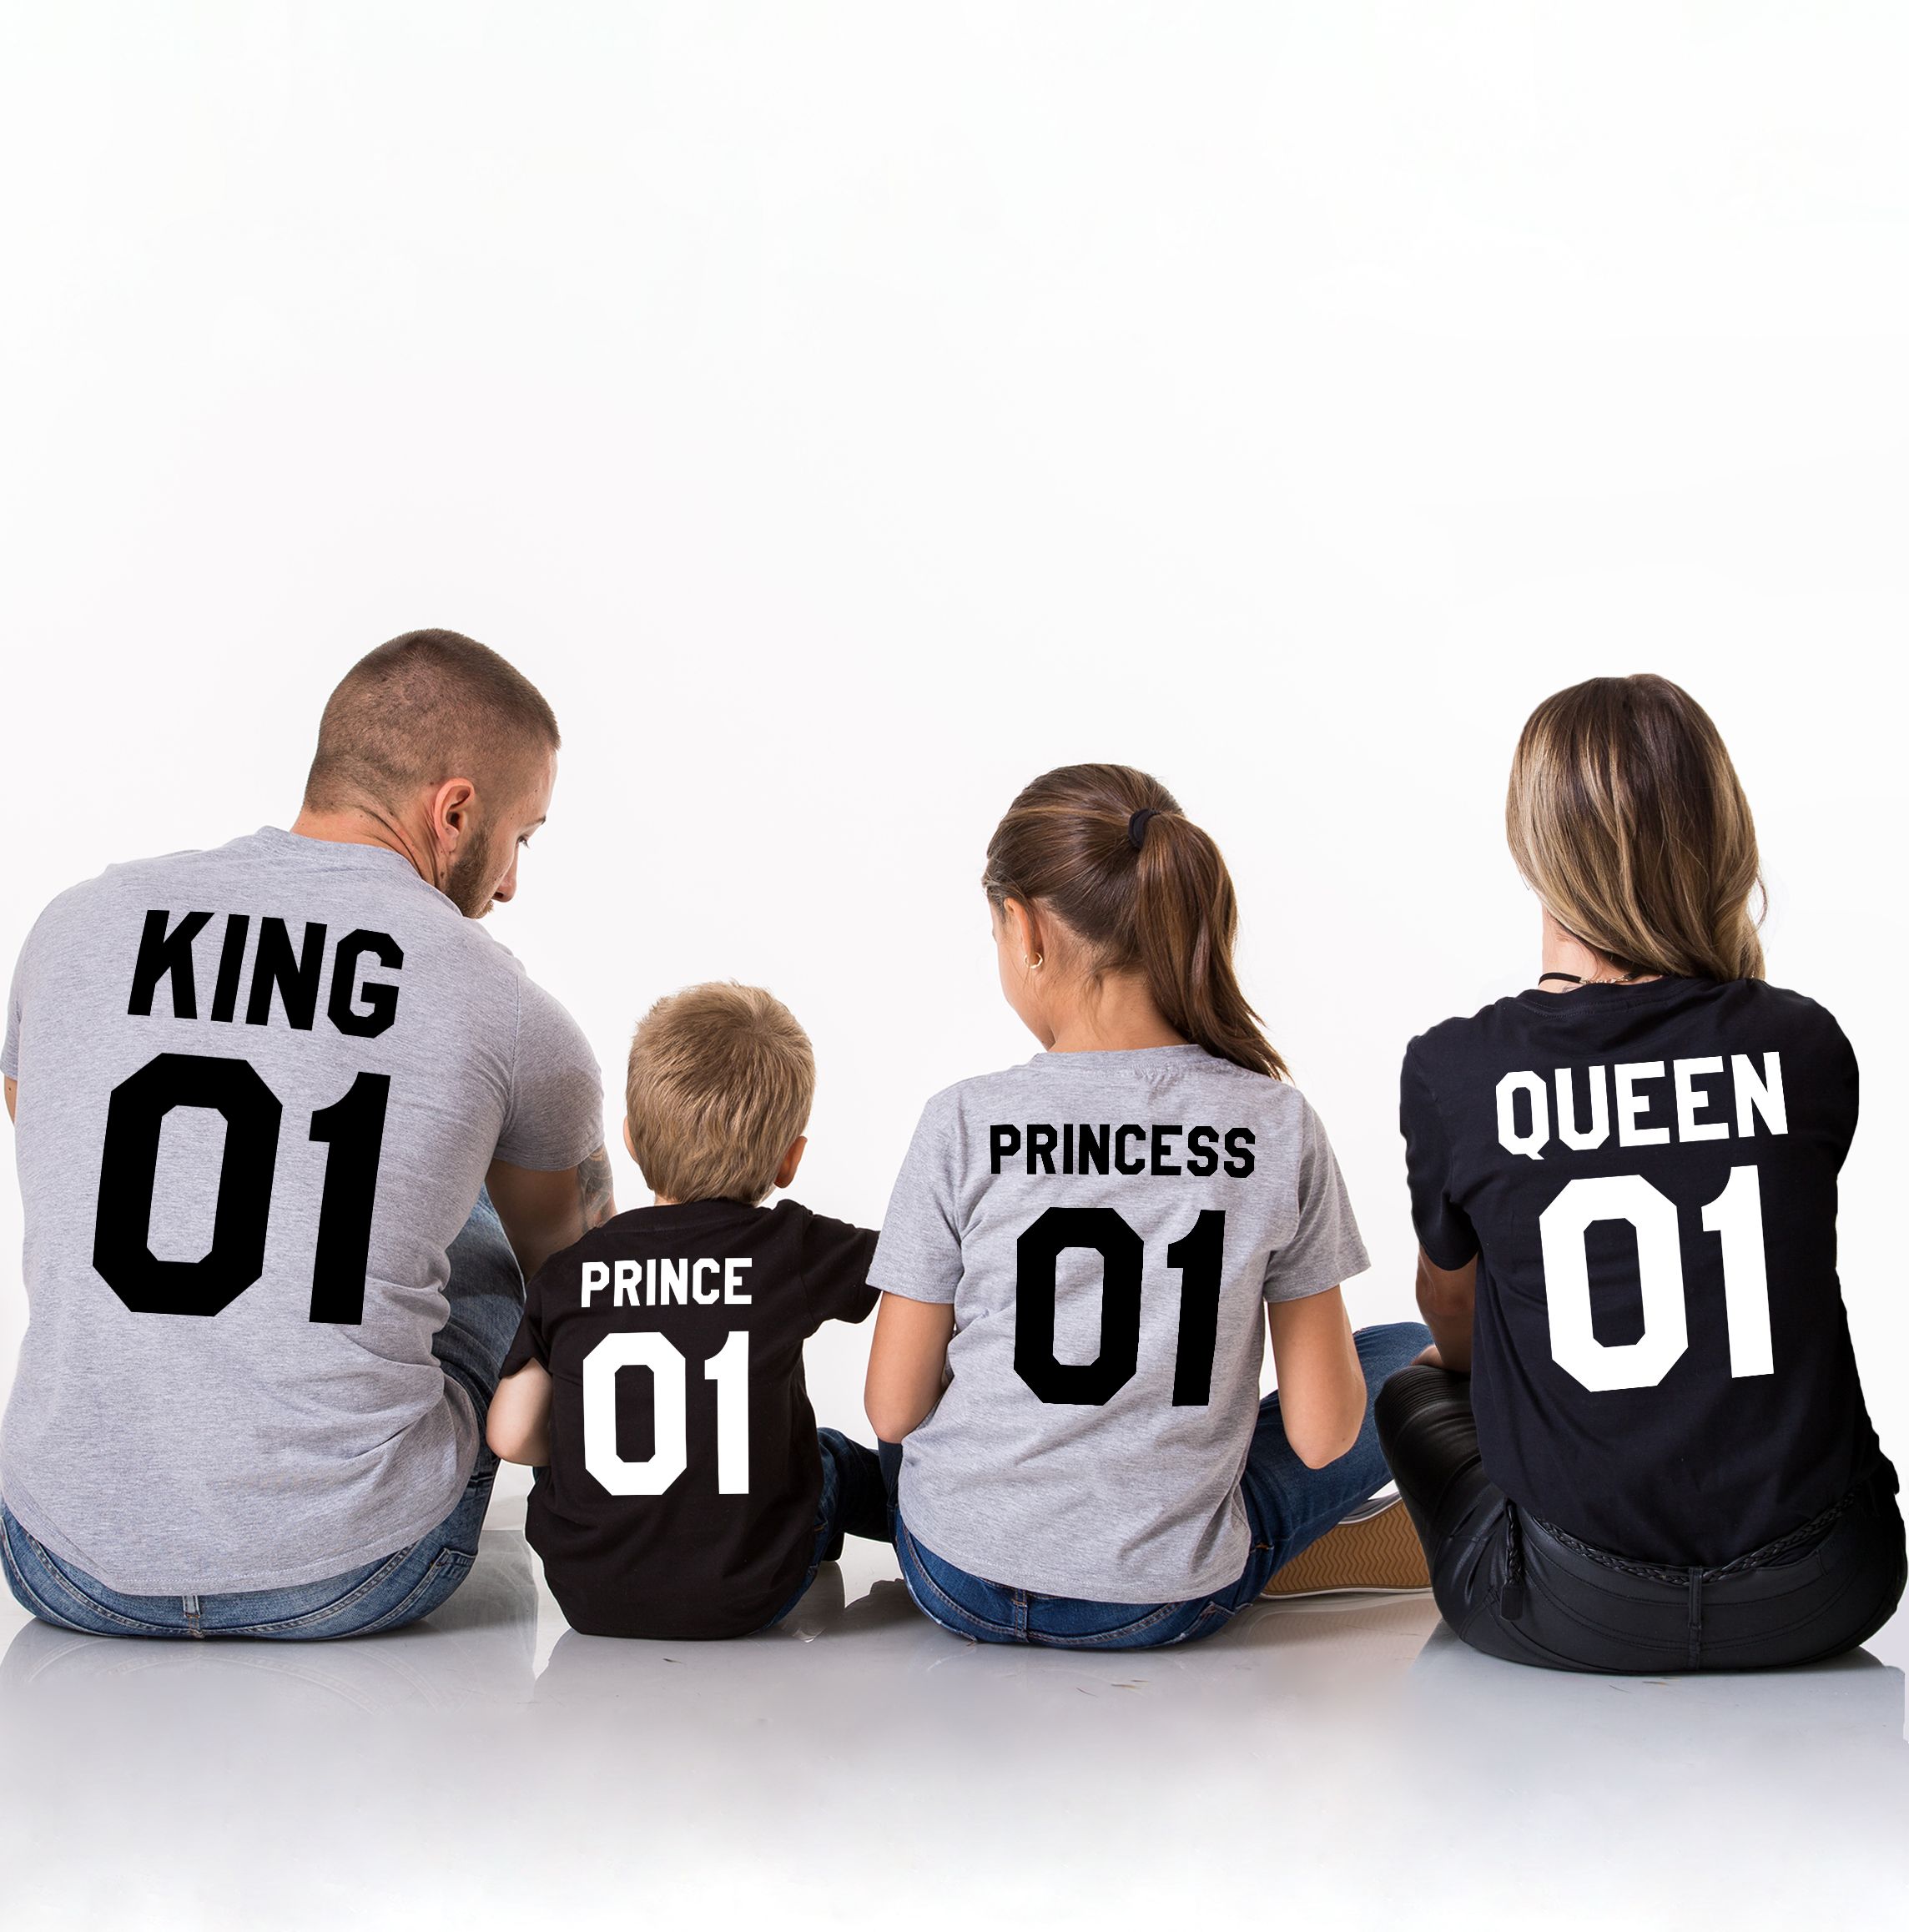 Prince and Princess T-shirts set with custom numbers. Queen Family King